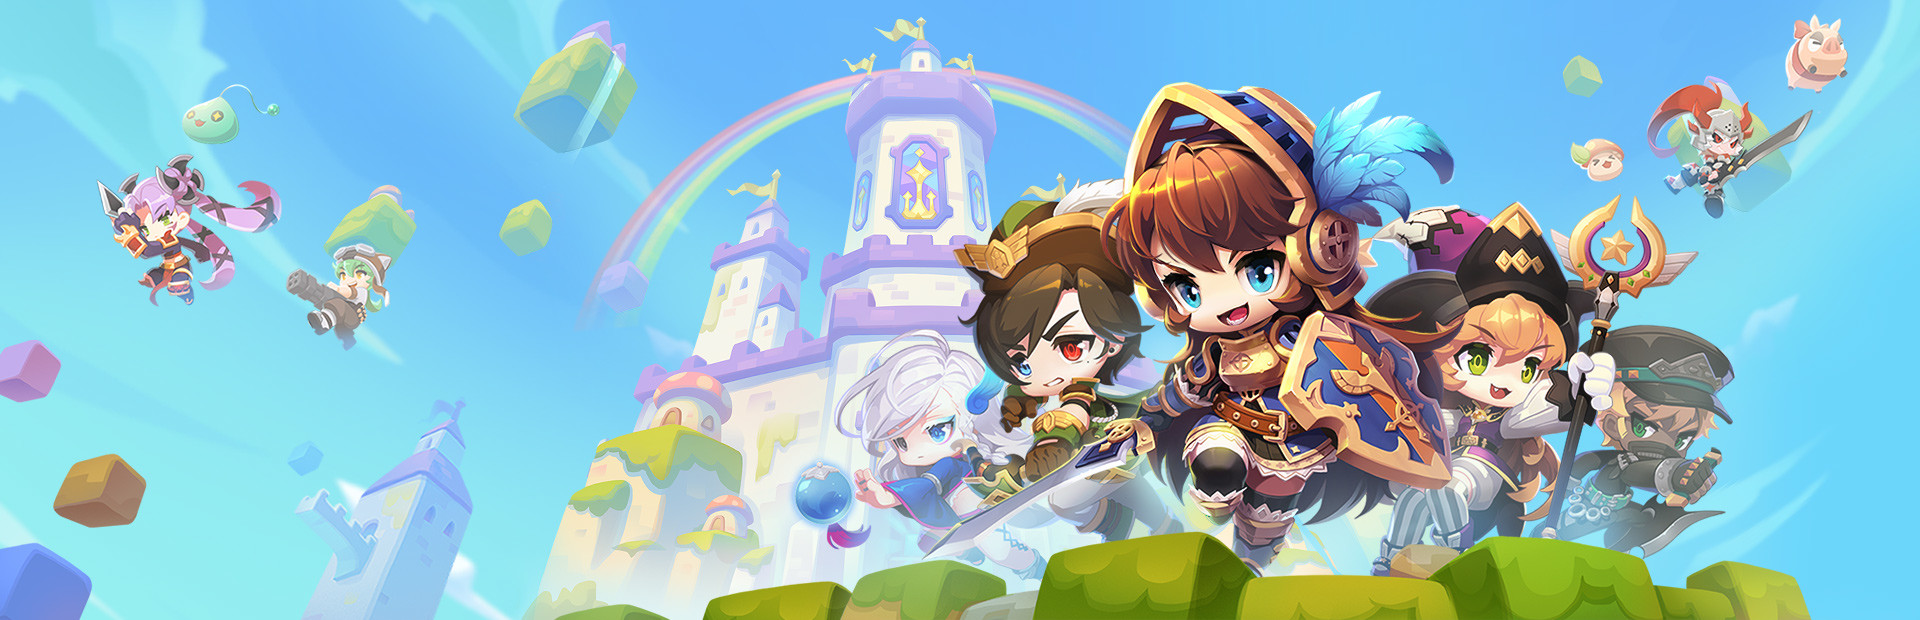 MapleStory 2 cover image